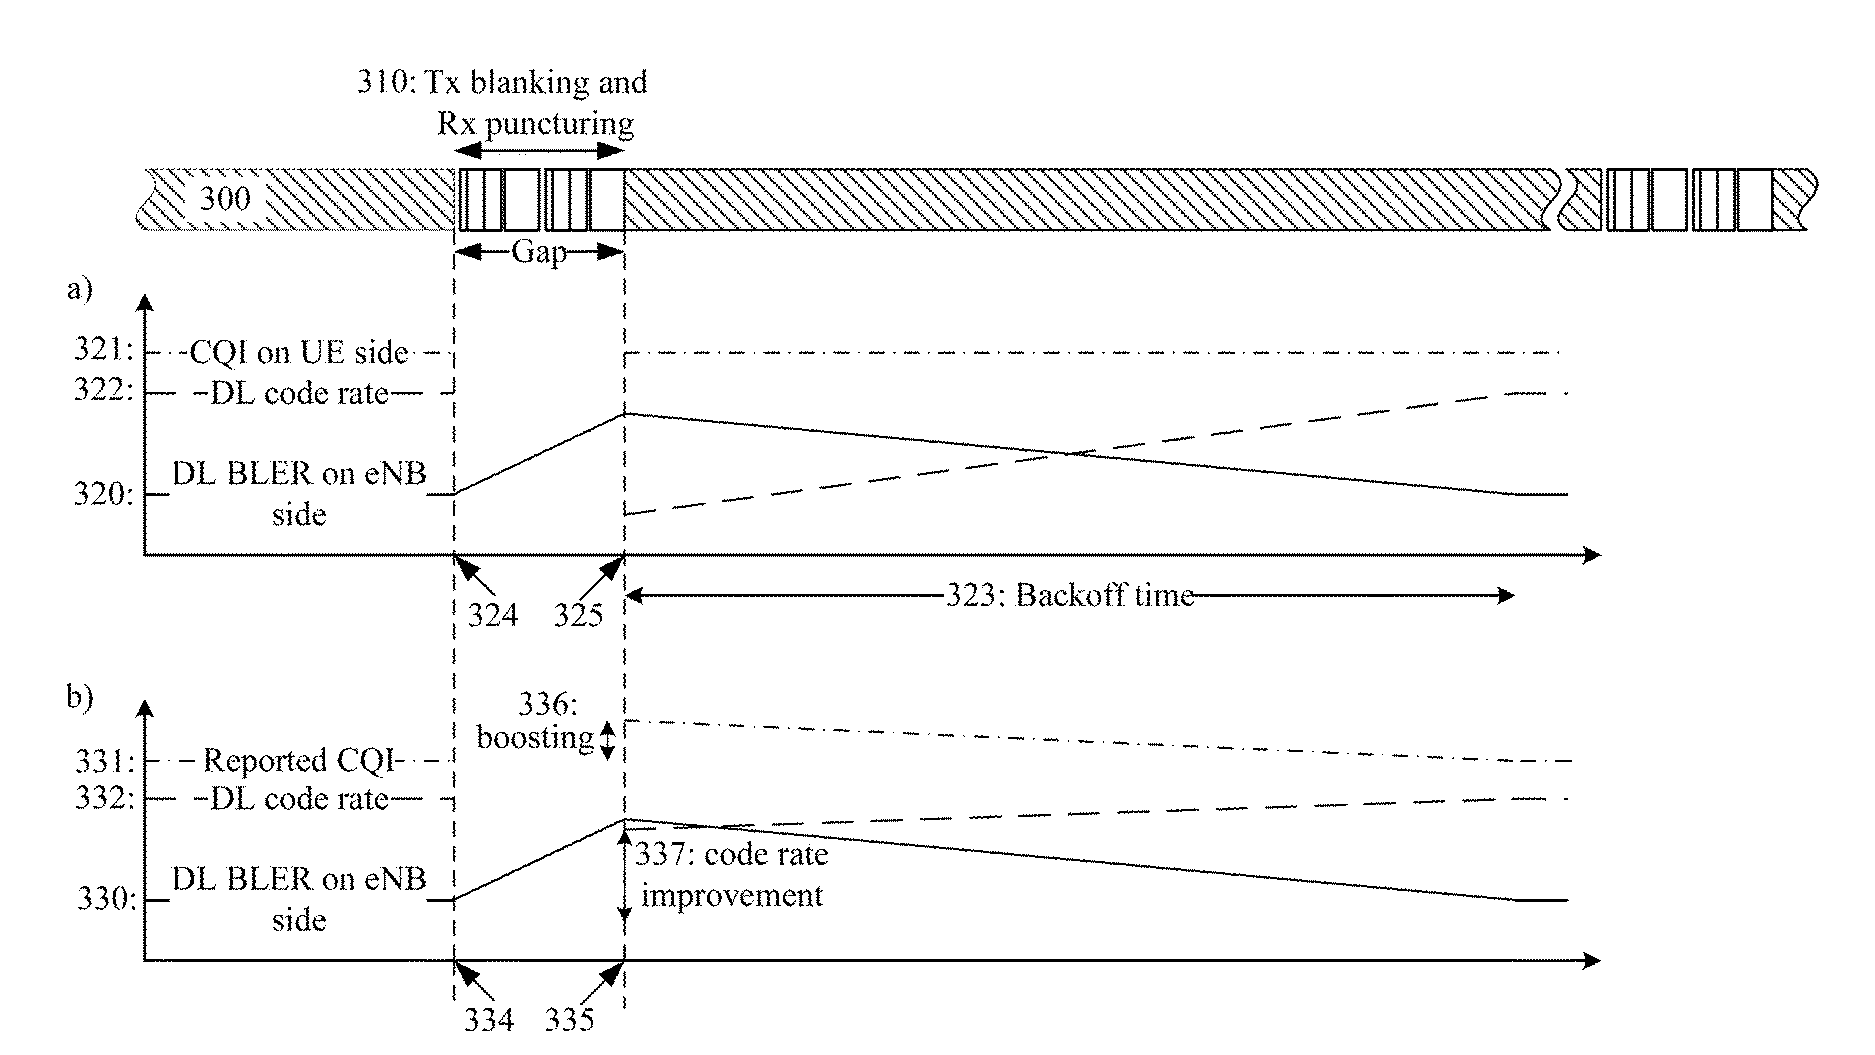 Handling of gaps in use of a radio transceiver